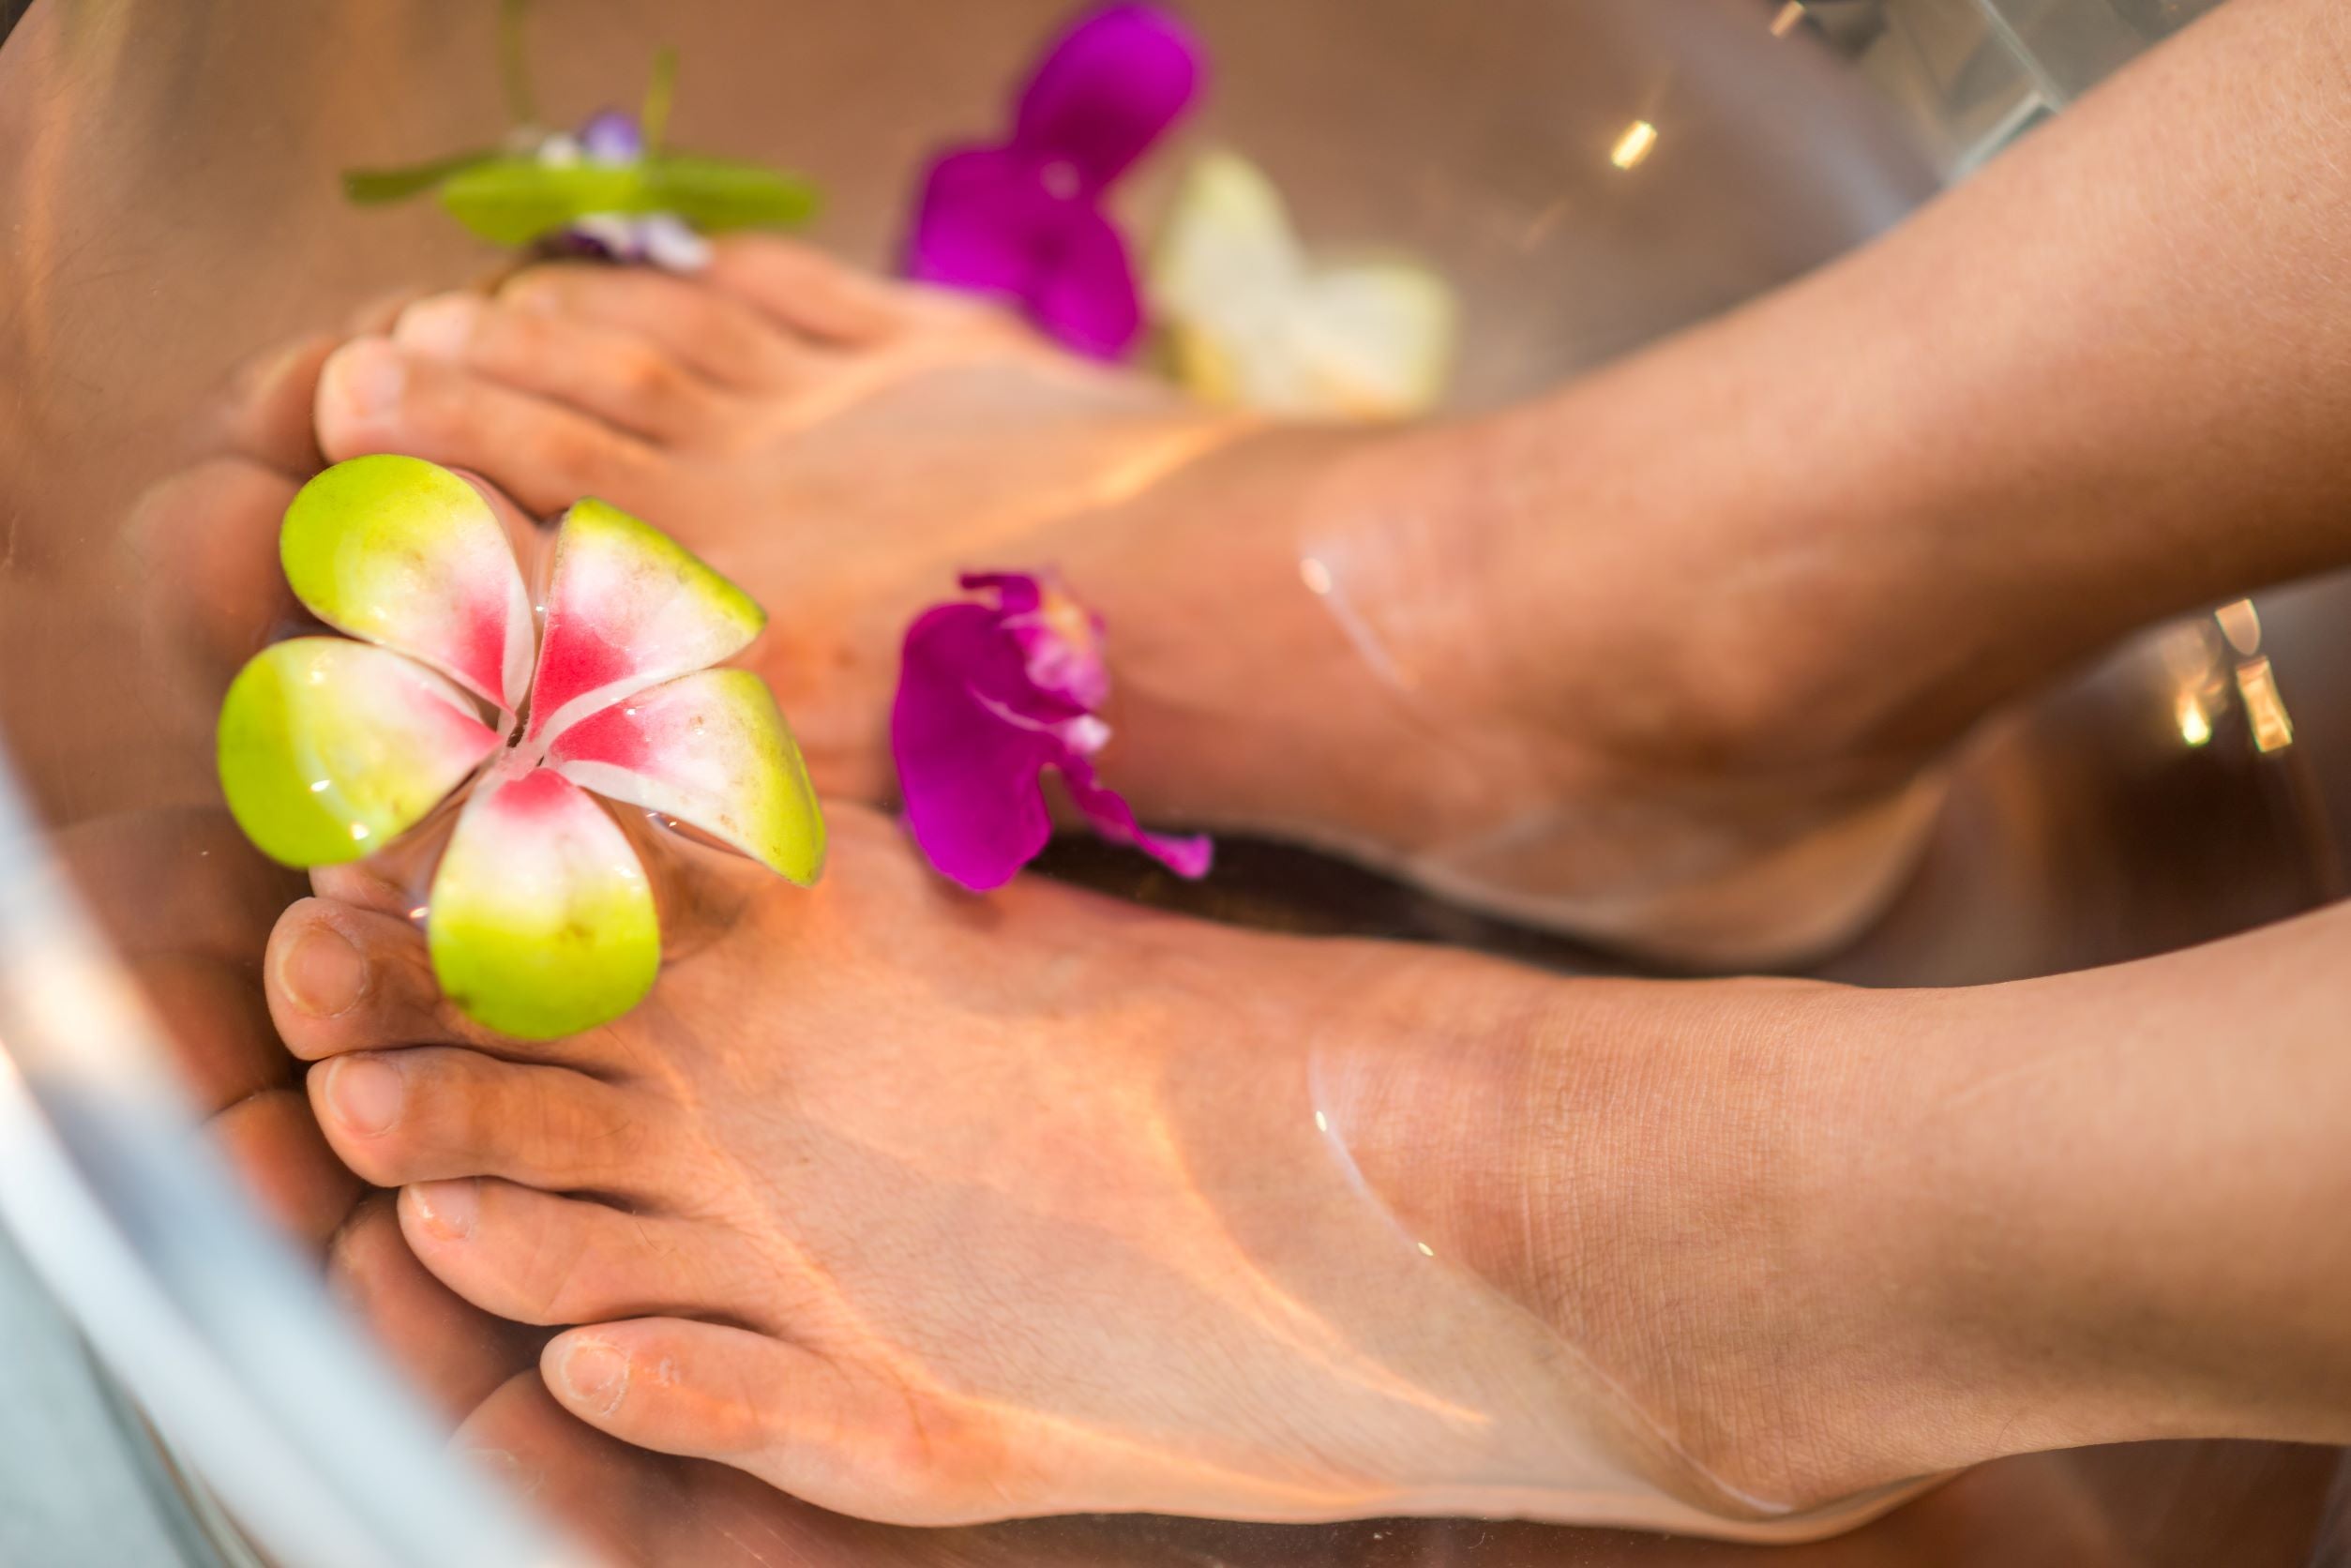 How Treating Your Feet Leads to Better Overall Wellness